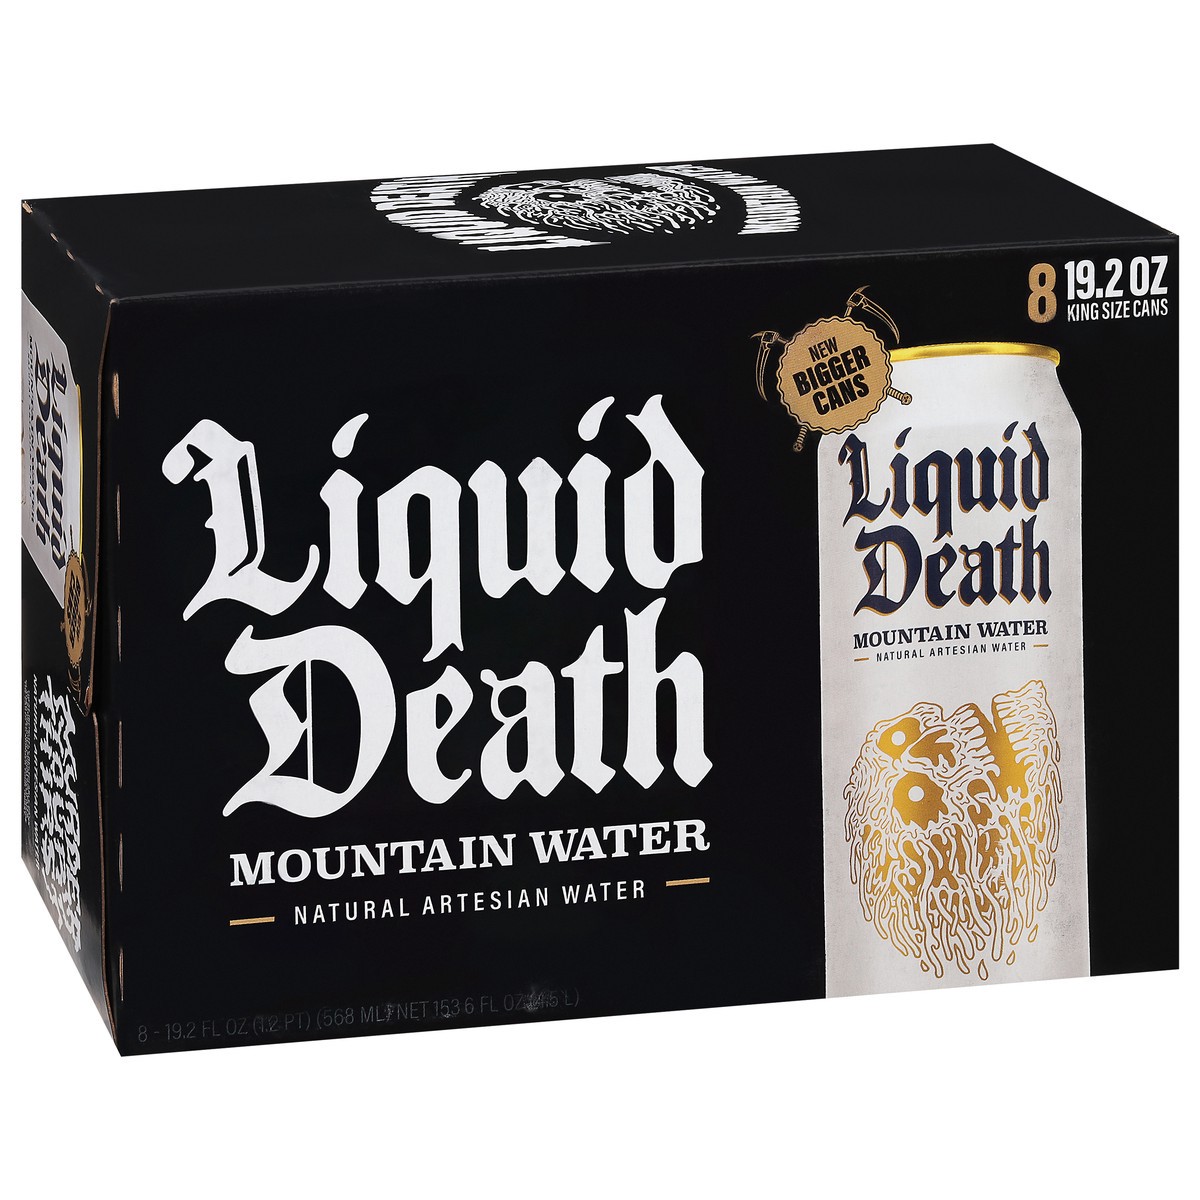 slide 2 of 9, Liquid Death Mountain Water, 19.2 oz King Size Cans (8-Pack), 8 ct